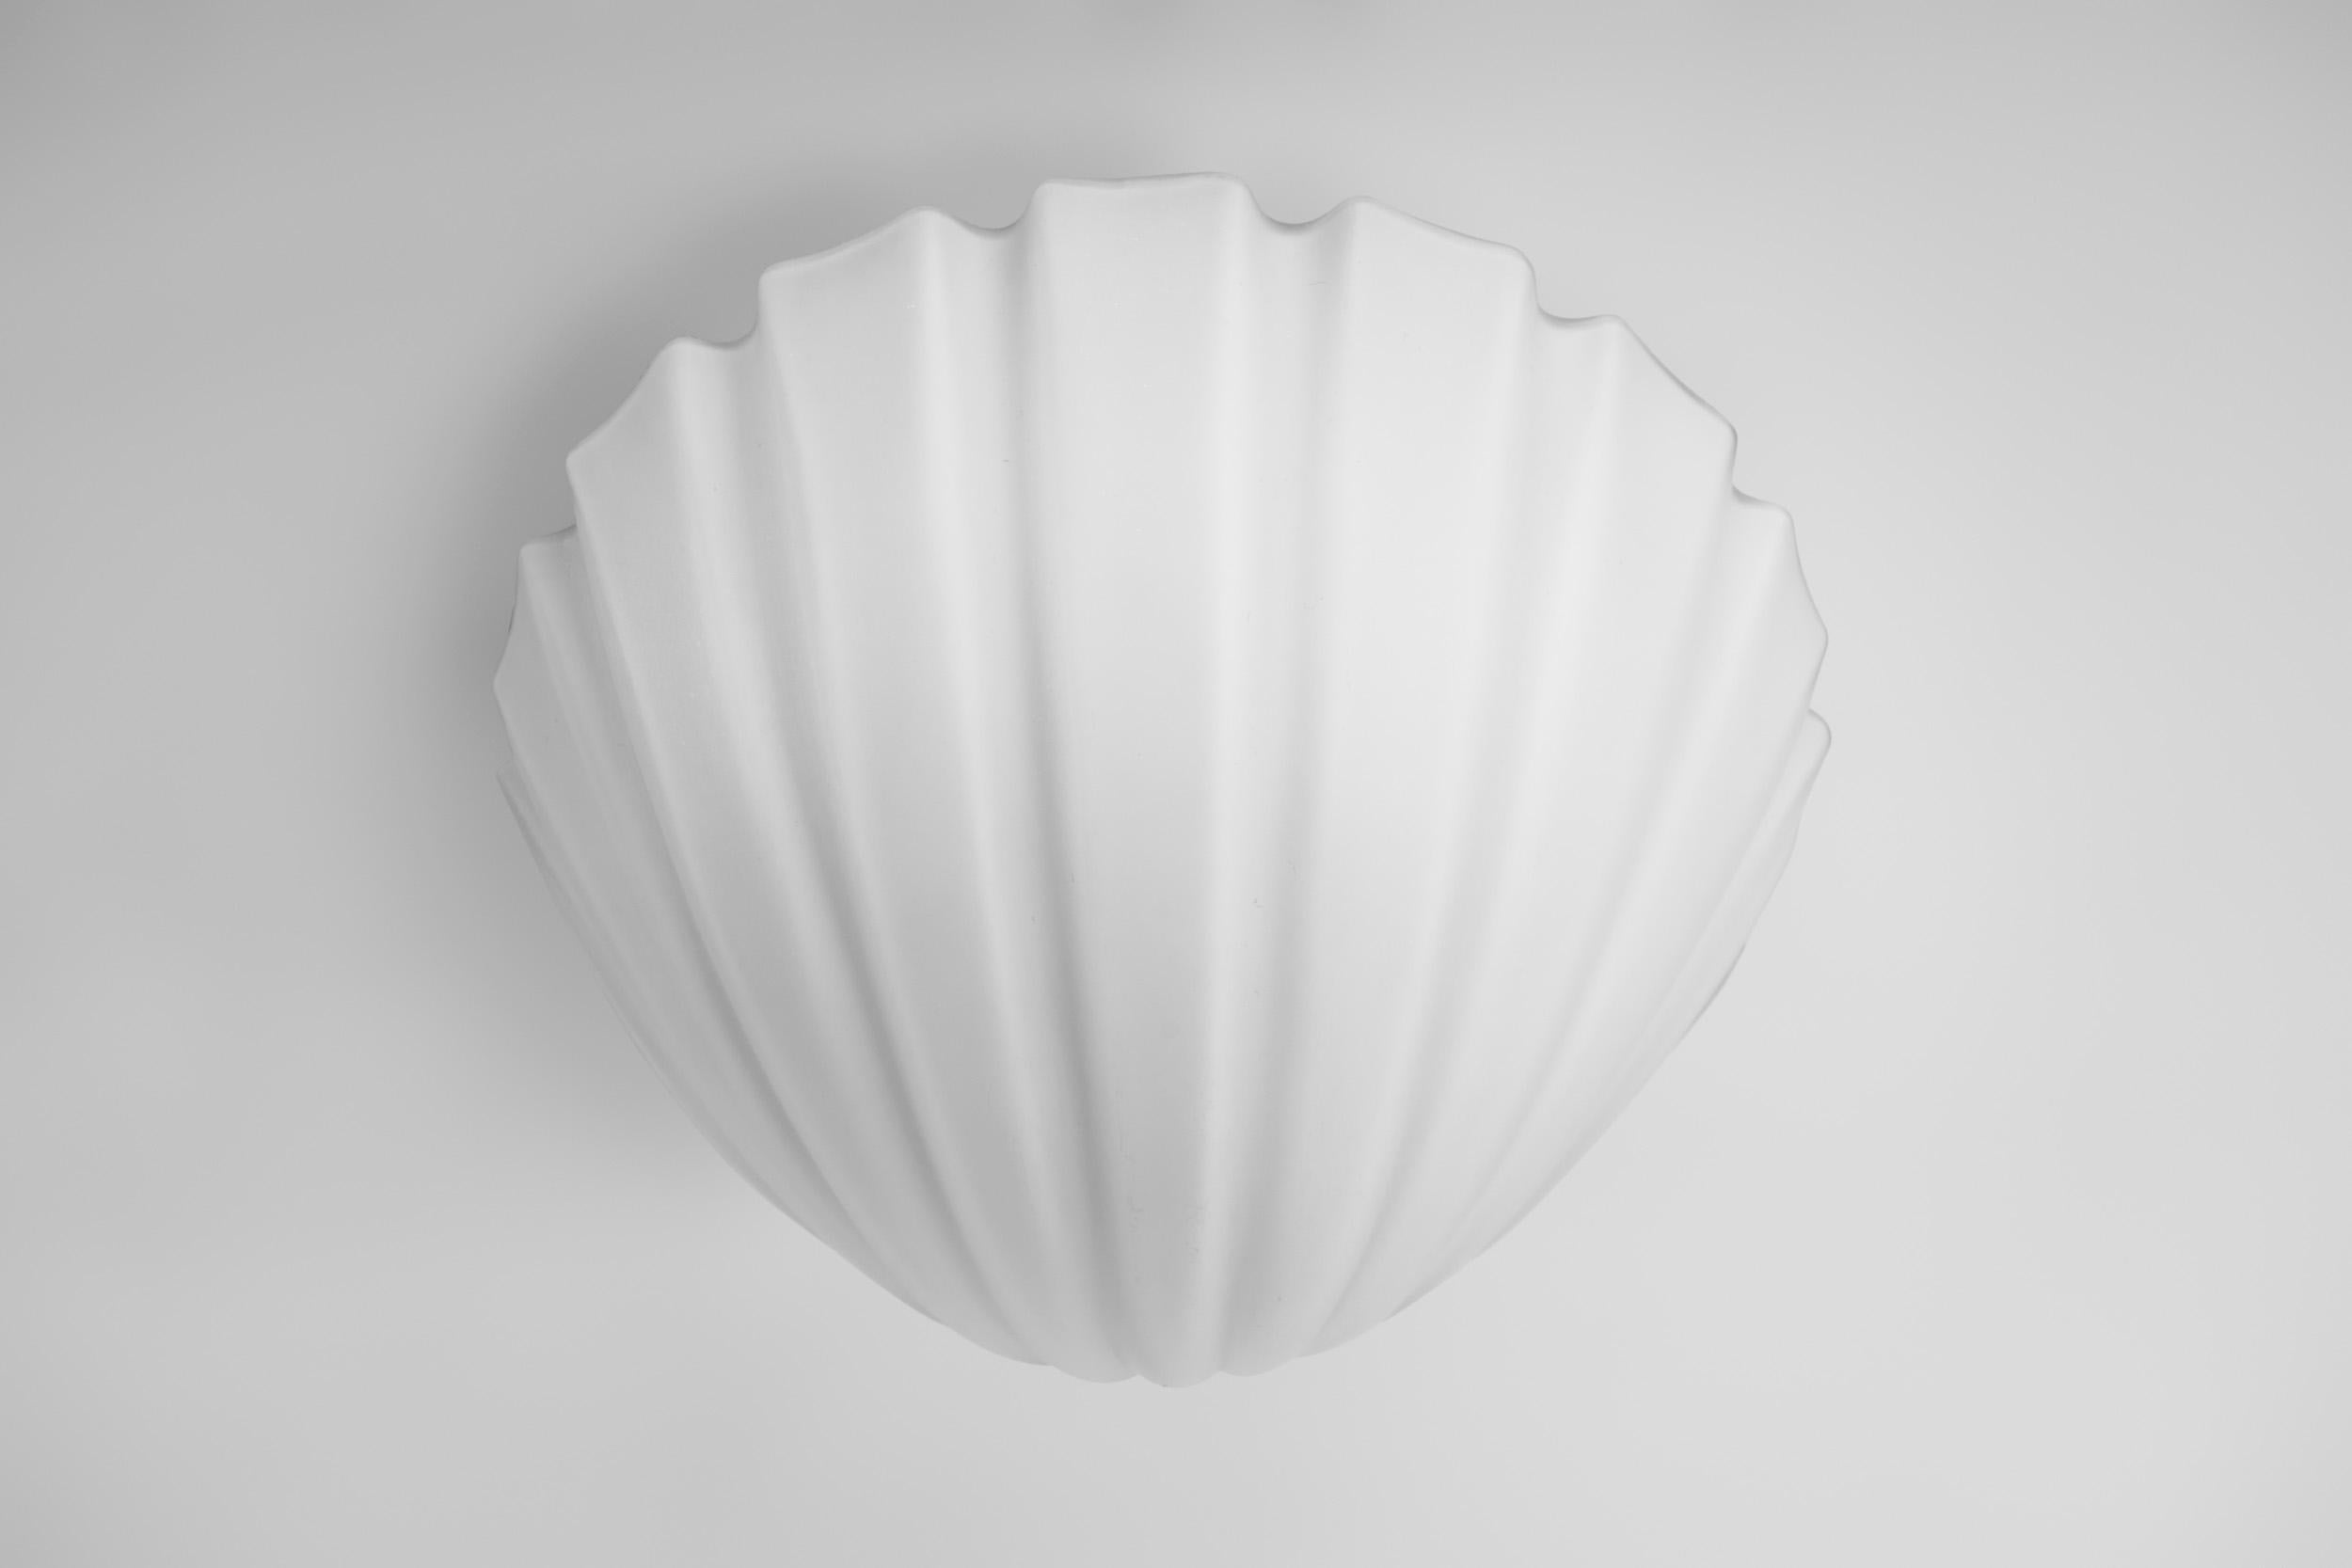 Pair of Opal Glass Seashell Wall Lamps by Glashütte Limburg, Germany 1970s For Sale 9